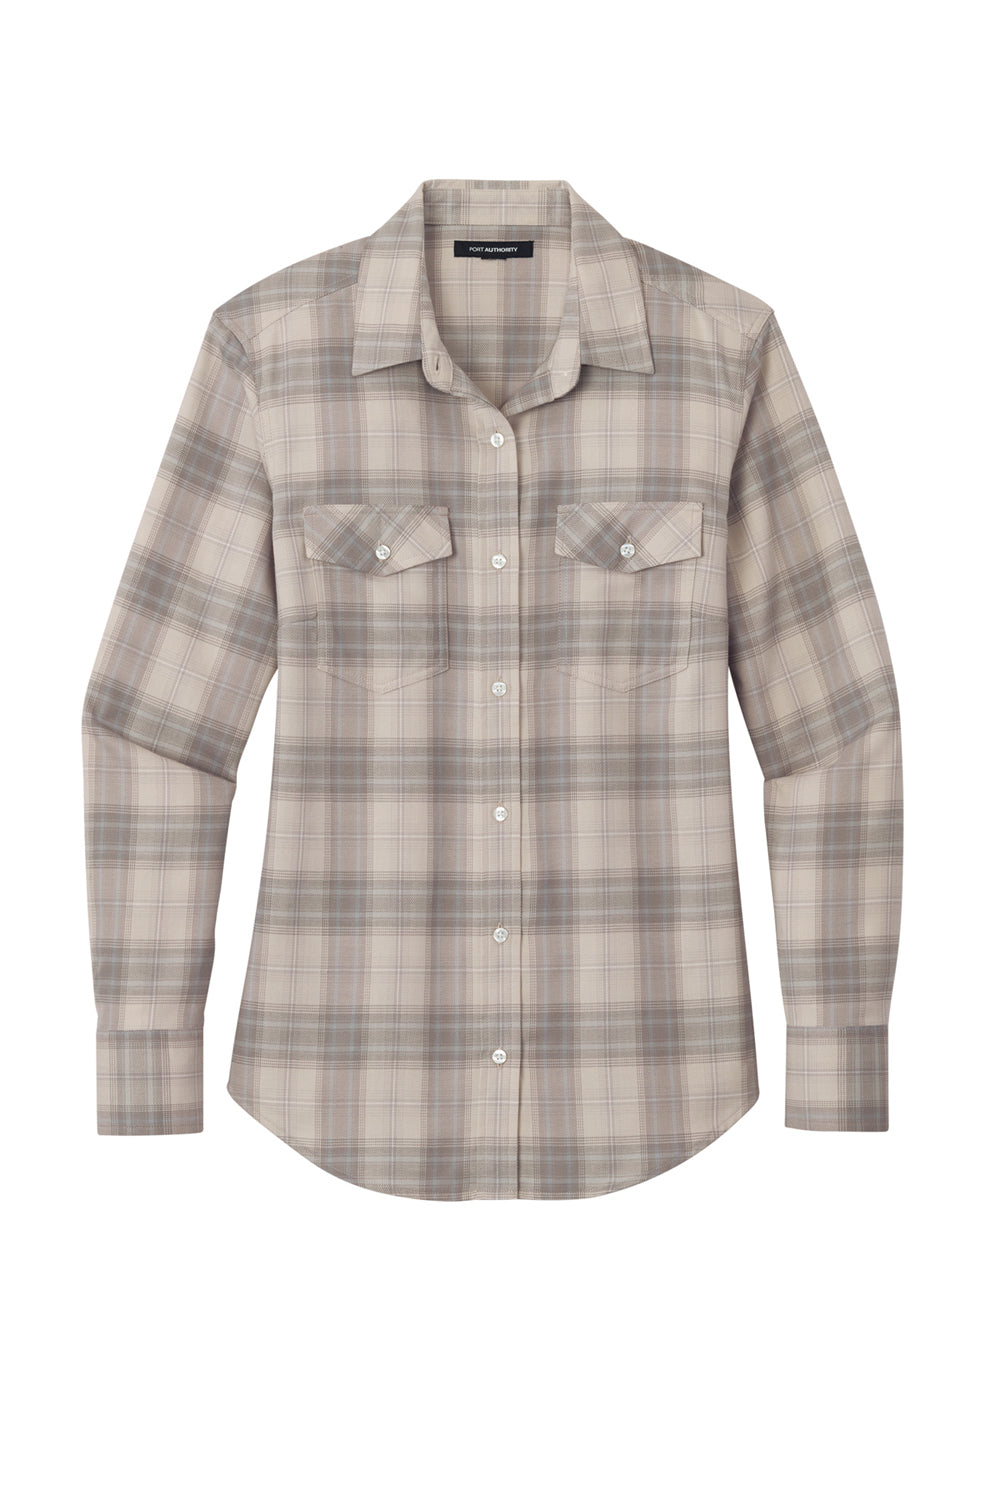 Port Authority LW672 Ombre Plaid Long Sleeve Button Down Shirt Frost Grey Flat Front